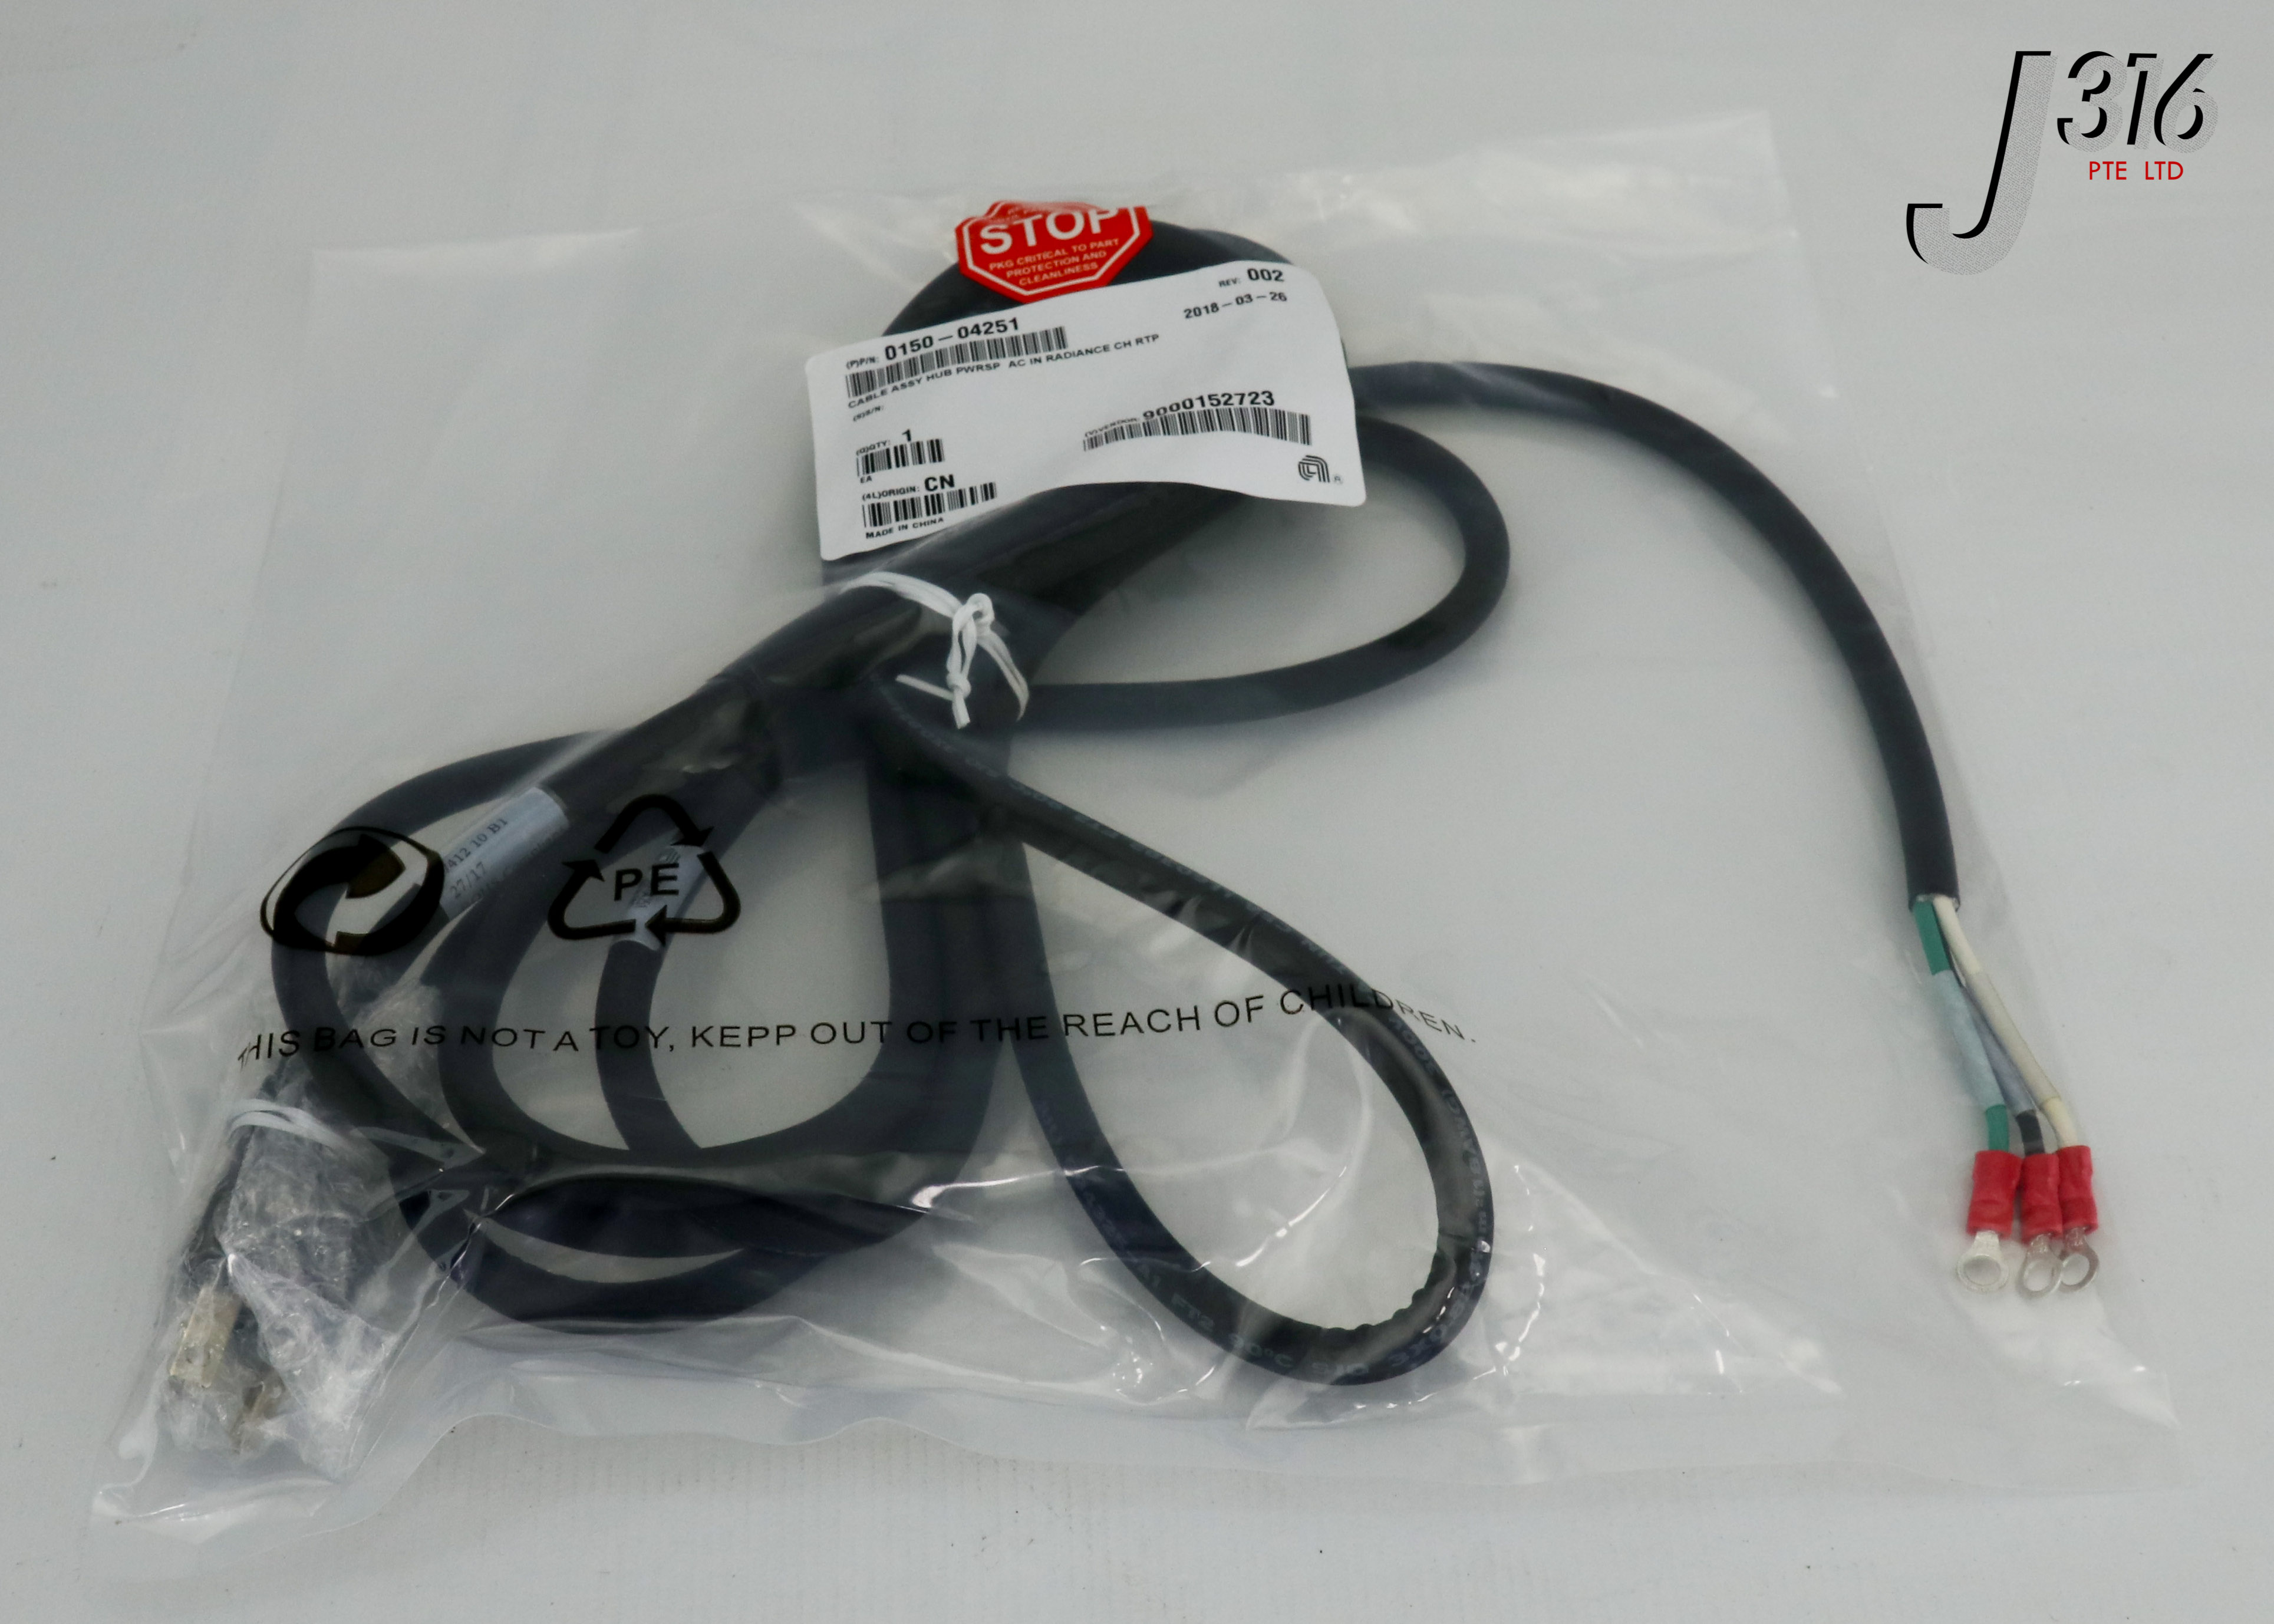 22224 Applied Materials Lamp ASSY Cycled 480 Watt XE CHMBR RTP 0190-36349 for sale online 